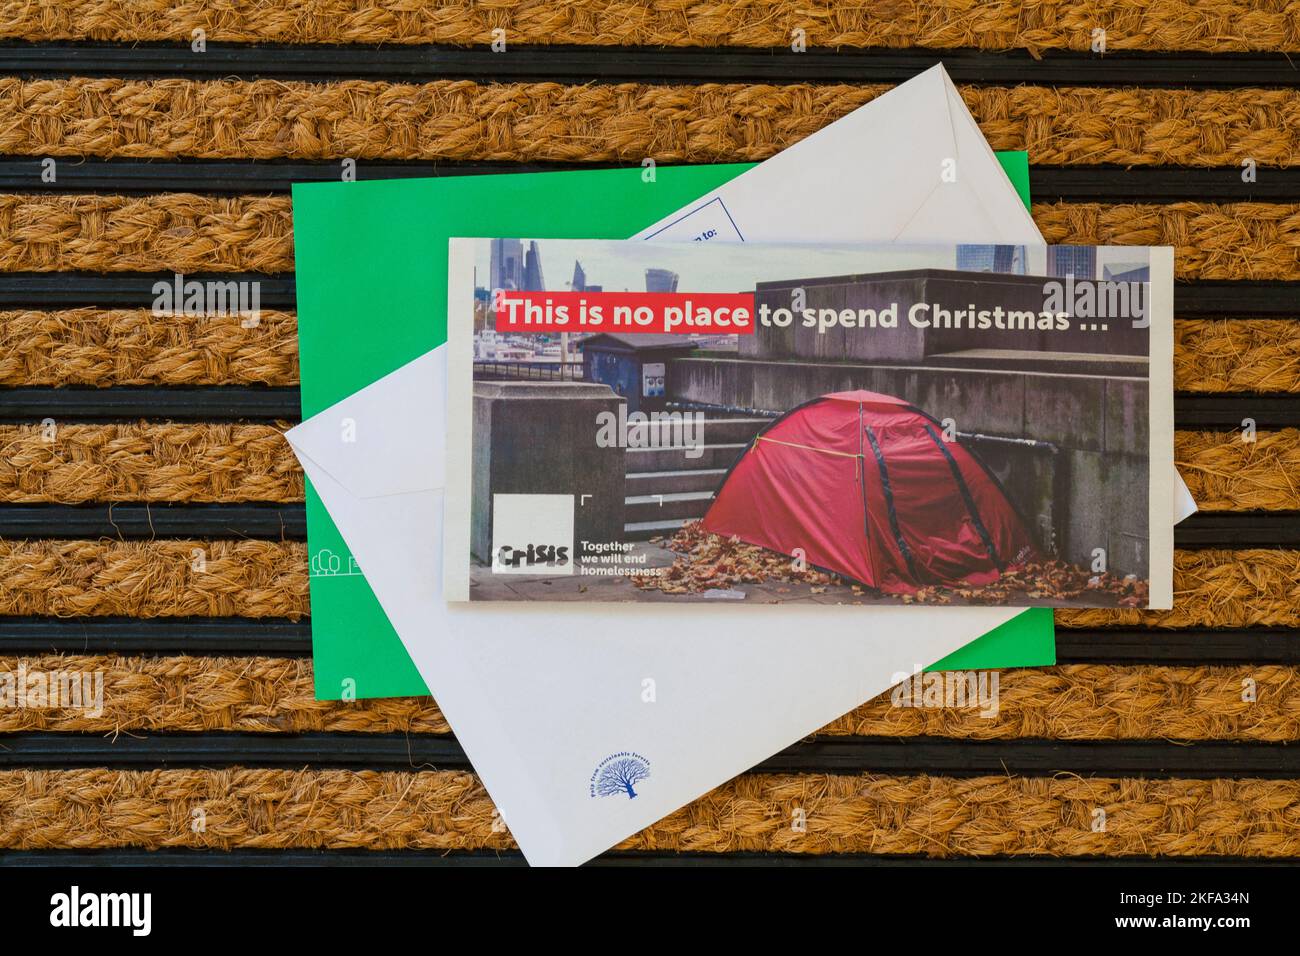 Post mail on doormat - charity appeal from Crisis, This is no place to spend Christmas Crisis together we will end homelessness Stock Photo